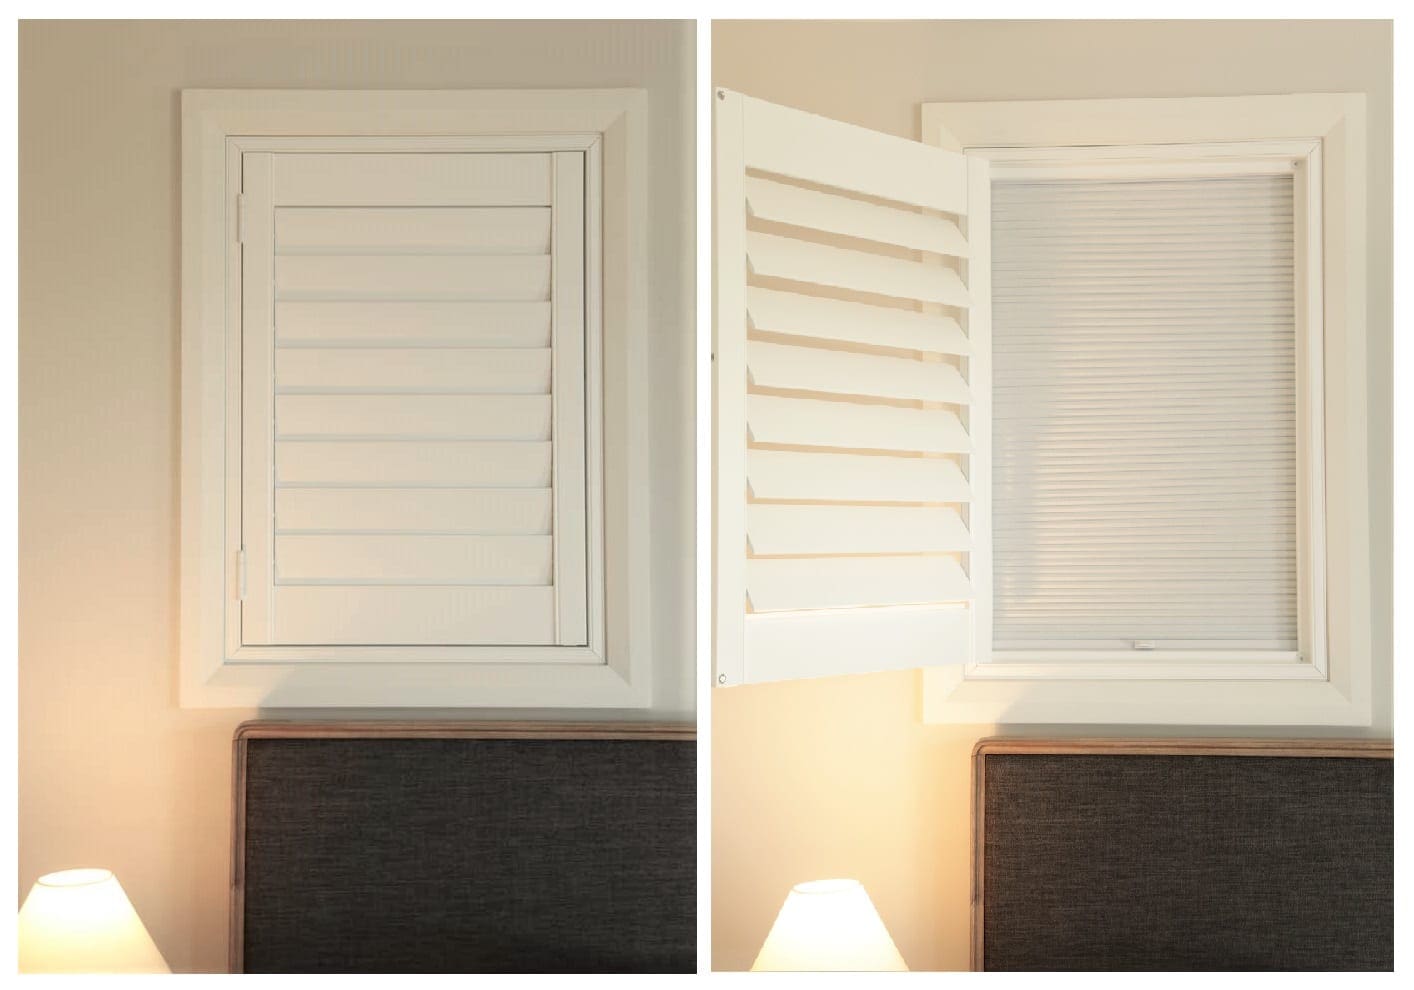 Allure Nightfall Currans Hill - Fusion Shutters and Blinds